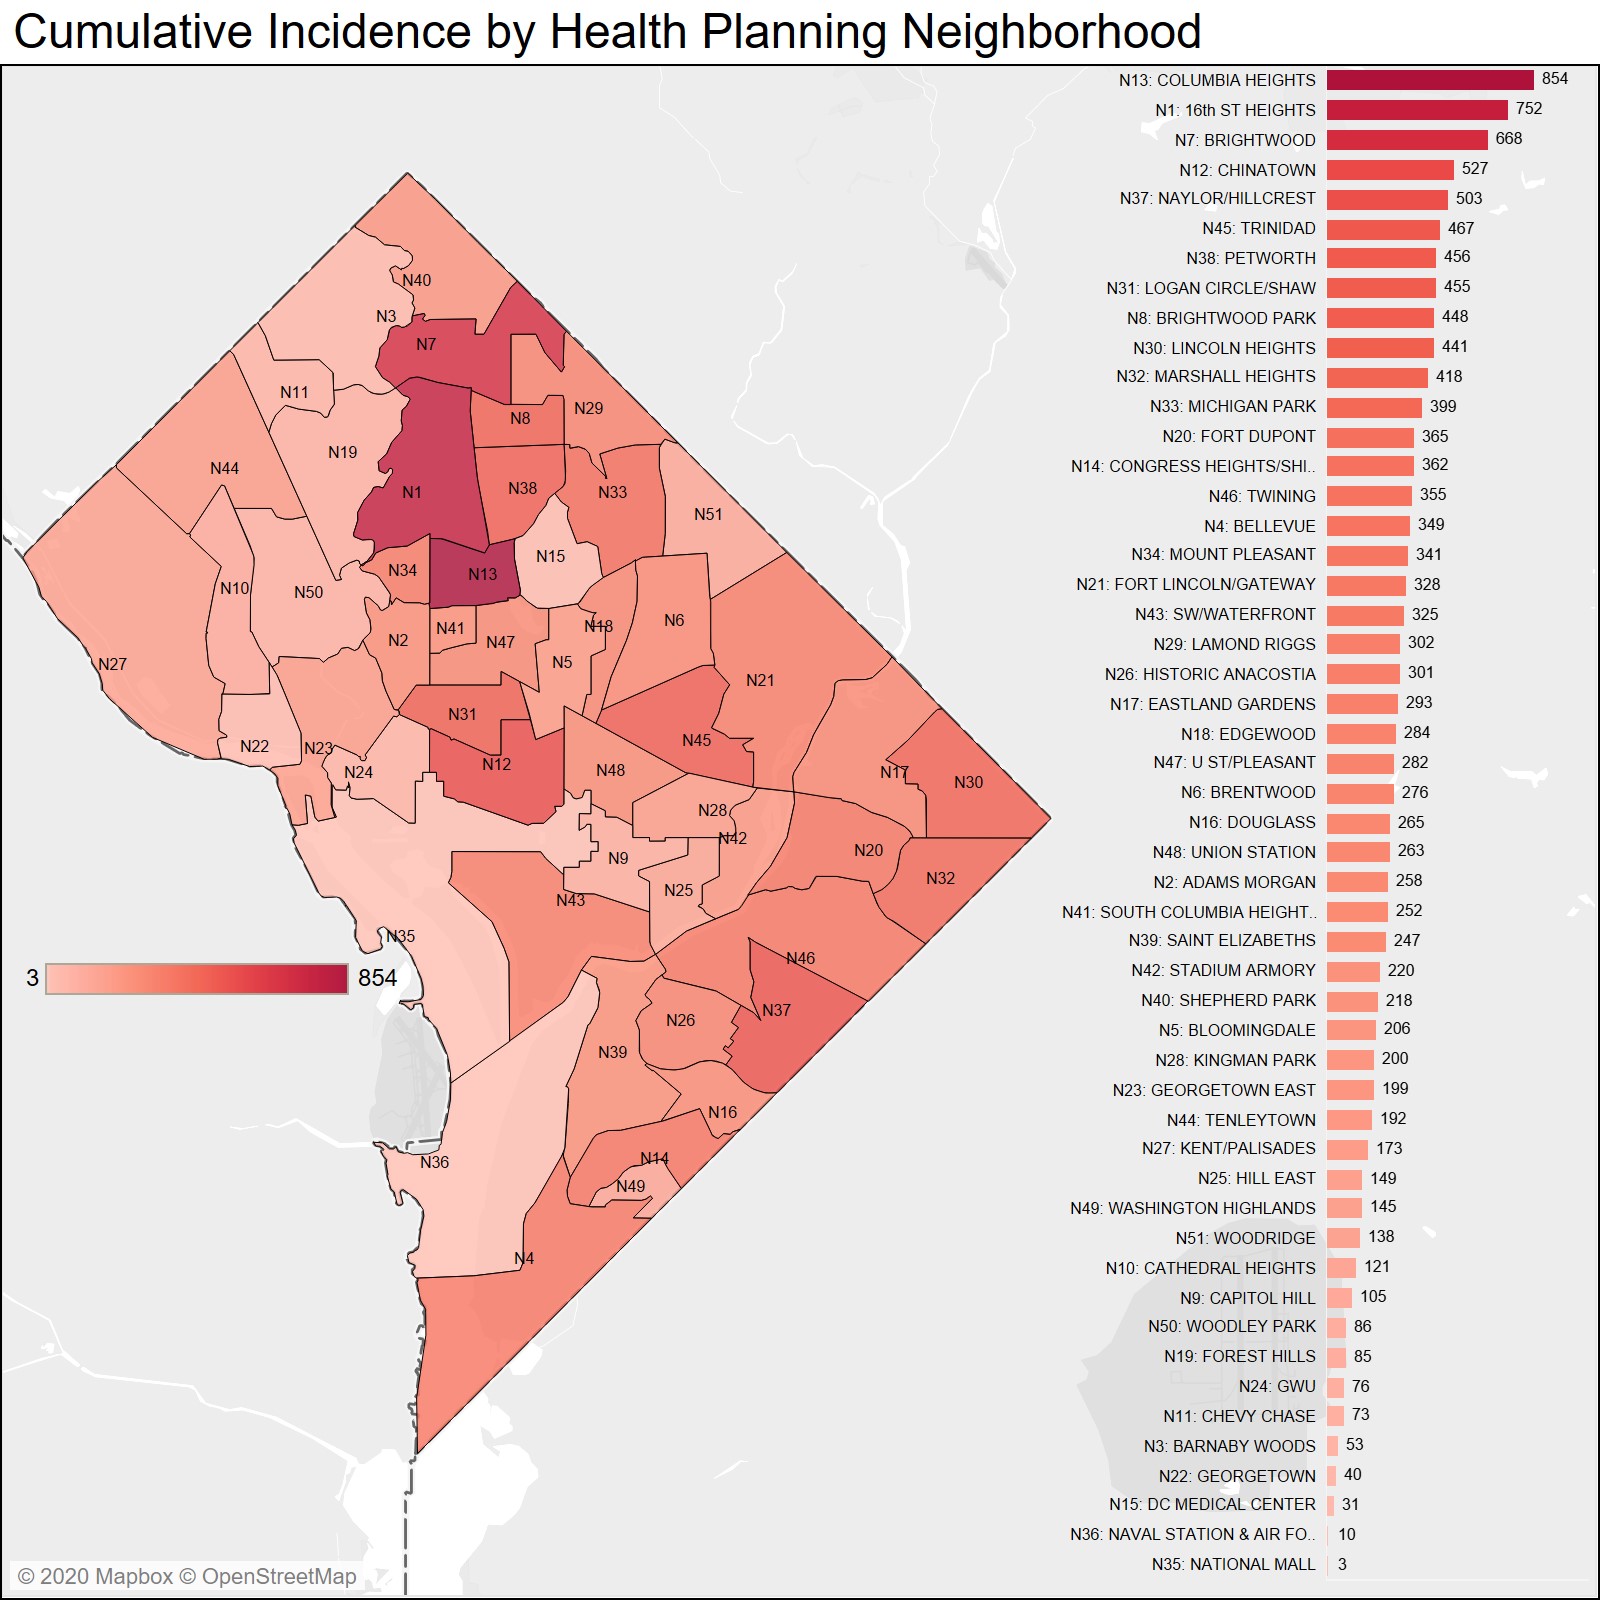 COVID-19 cases, sorted by neighborhood of residence